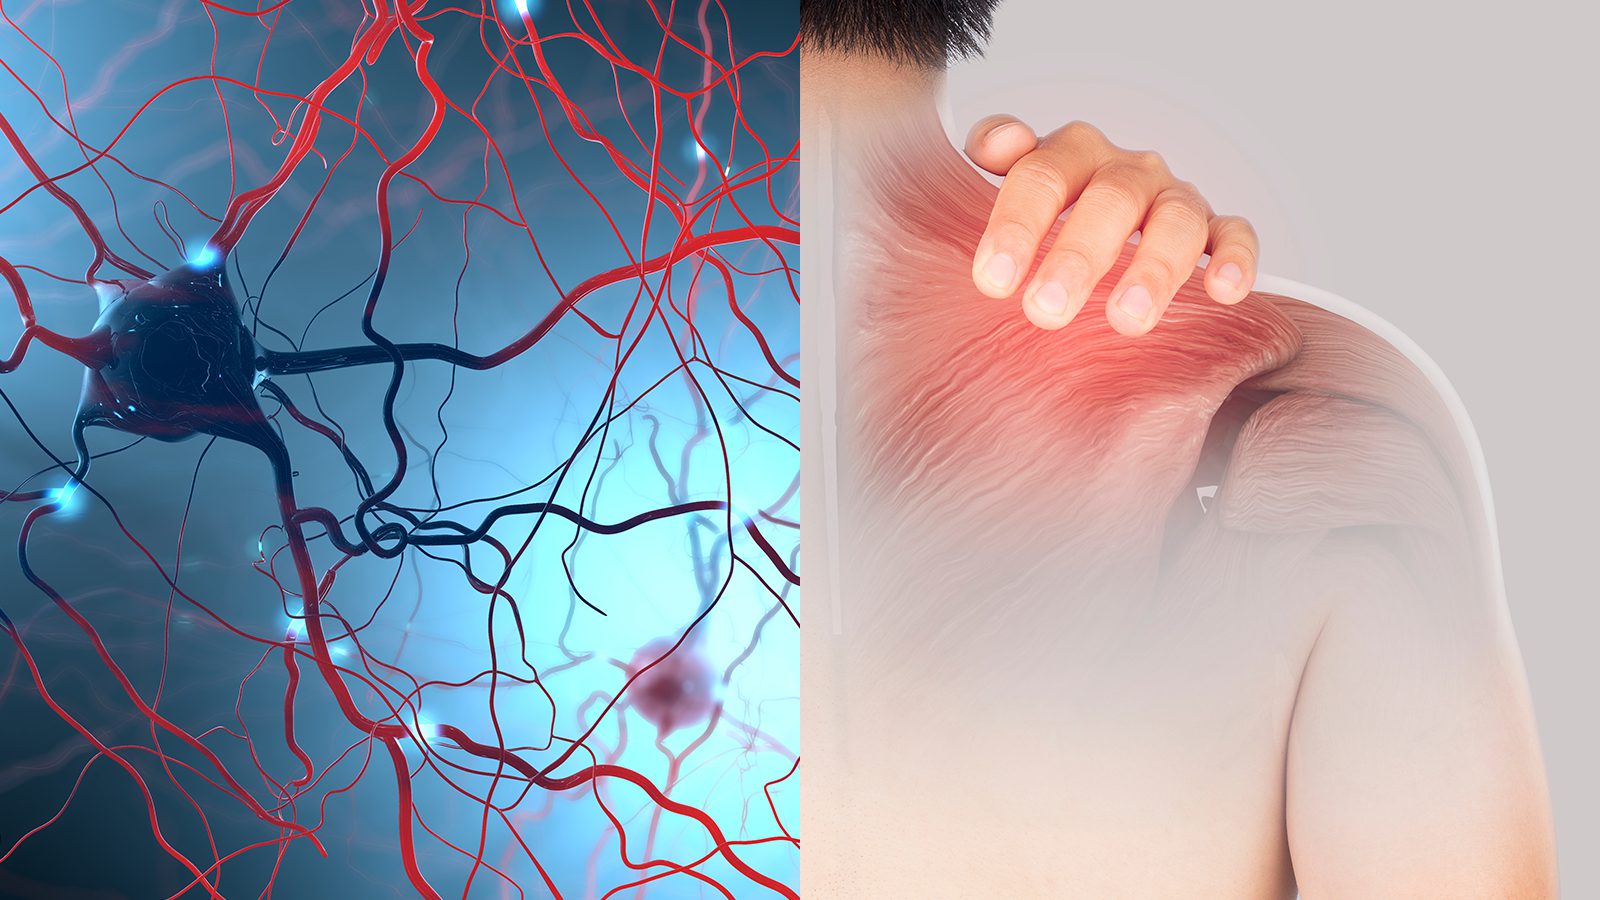 New Technology Can Reduce Pain Without Addictive Opioids 